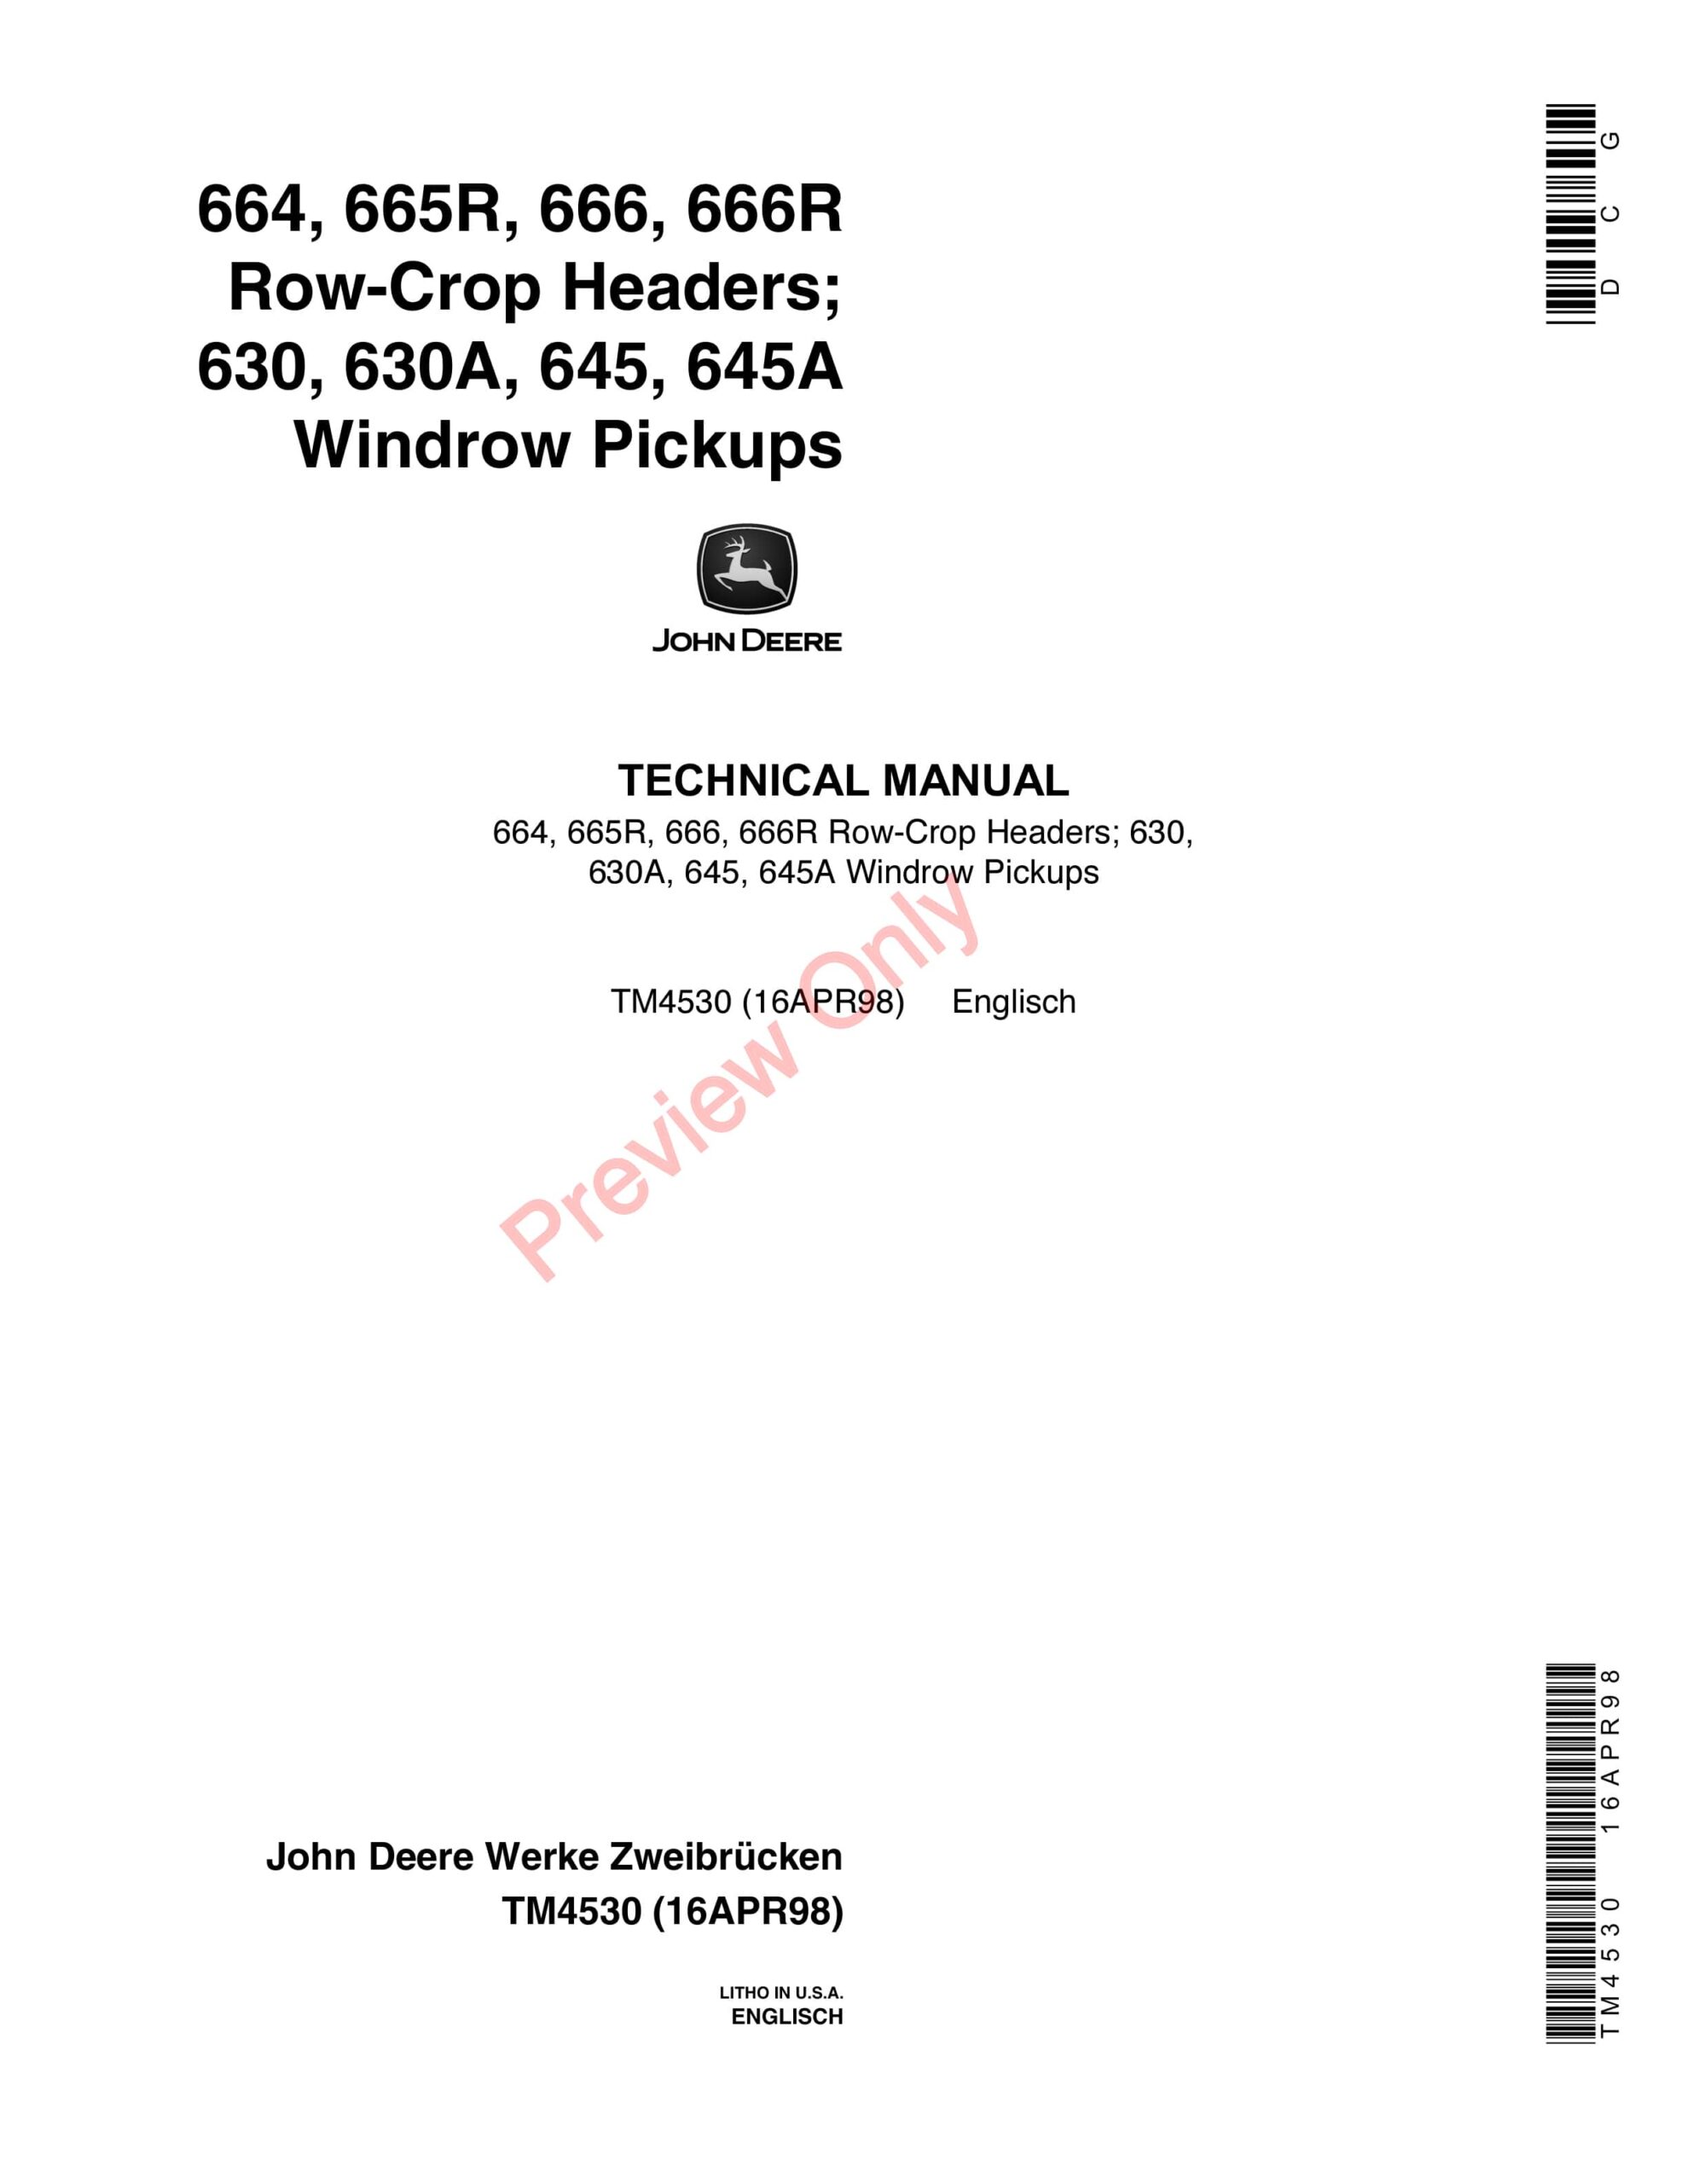 John Deere 664, 665R, 666, 666R Row-Crop Headers and 630, 630A, 645, 645A Windrow Pickup Technical Manual TM4530 16APR98-1